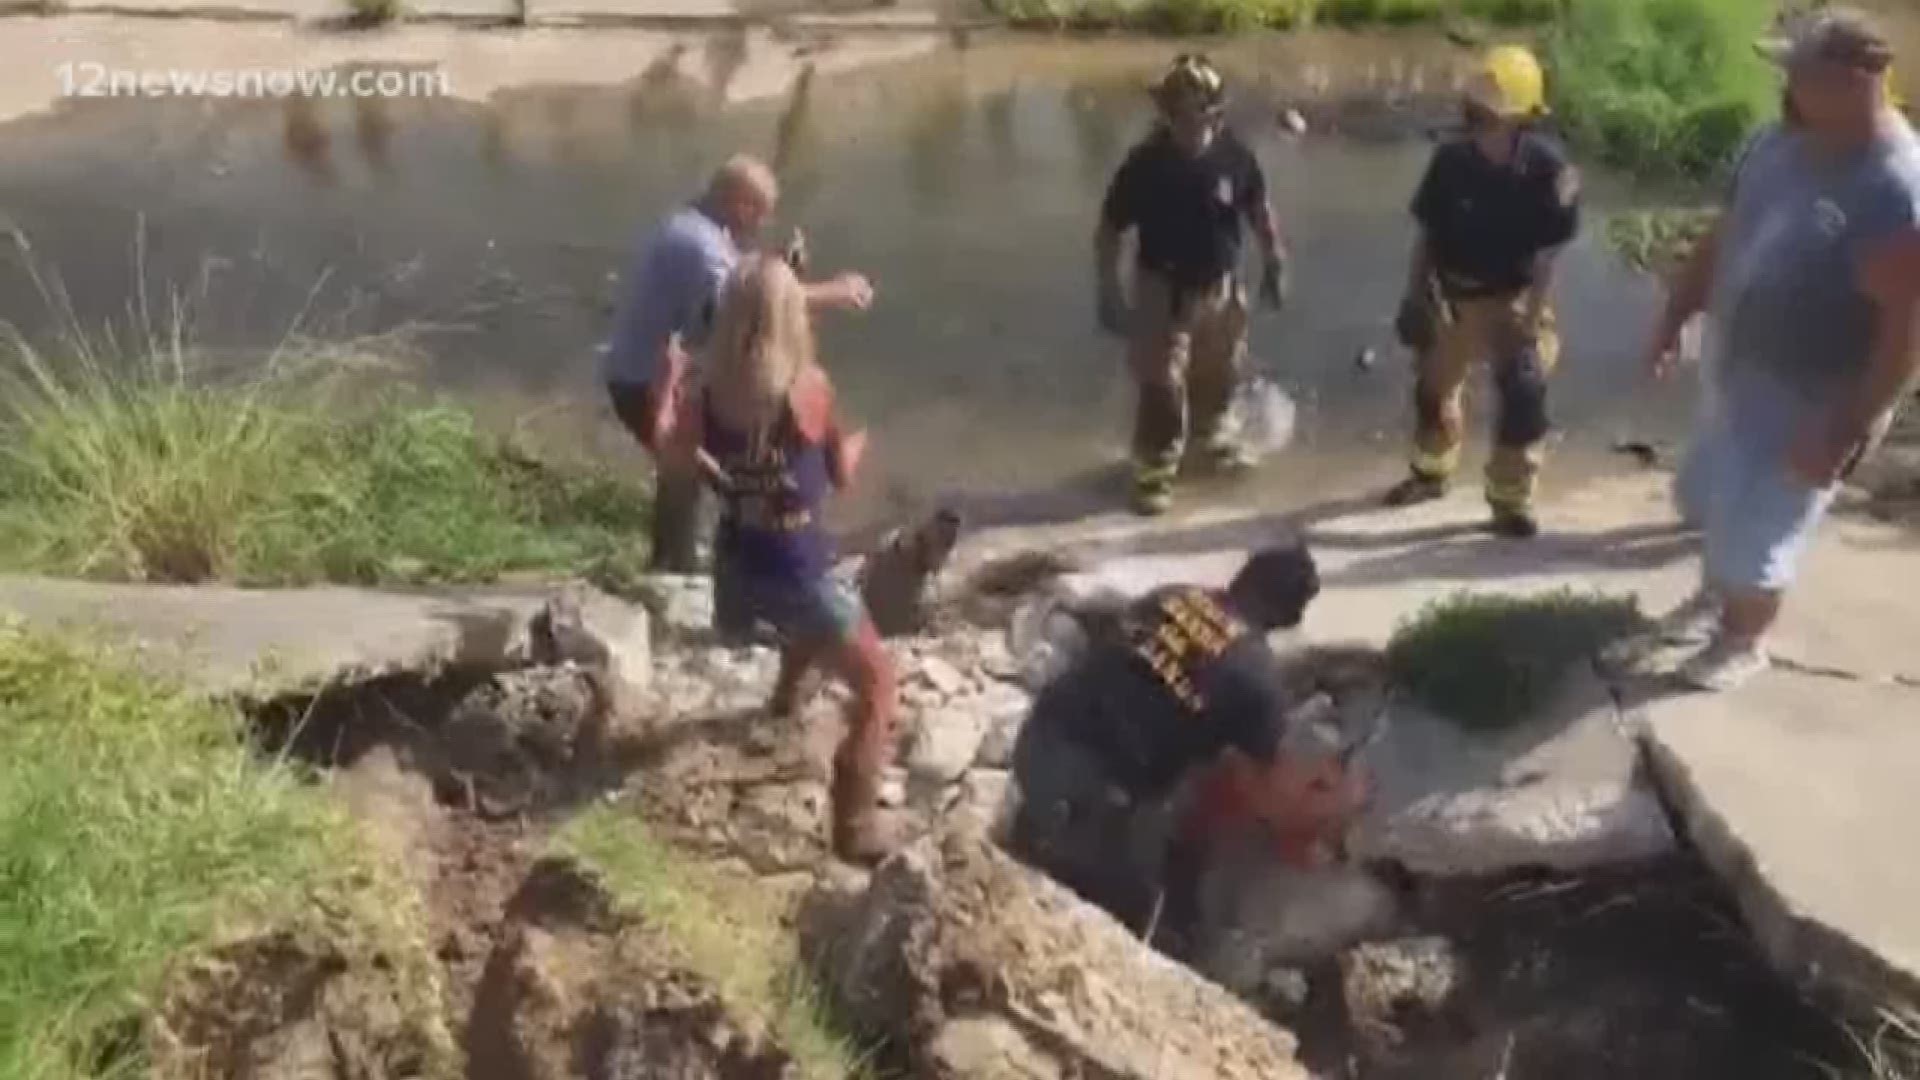 Gator Country gets multi-agency assist while pulling gator from beneath concrete drainage ditch